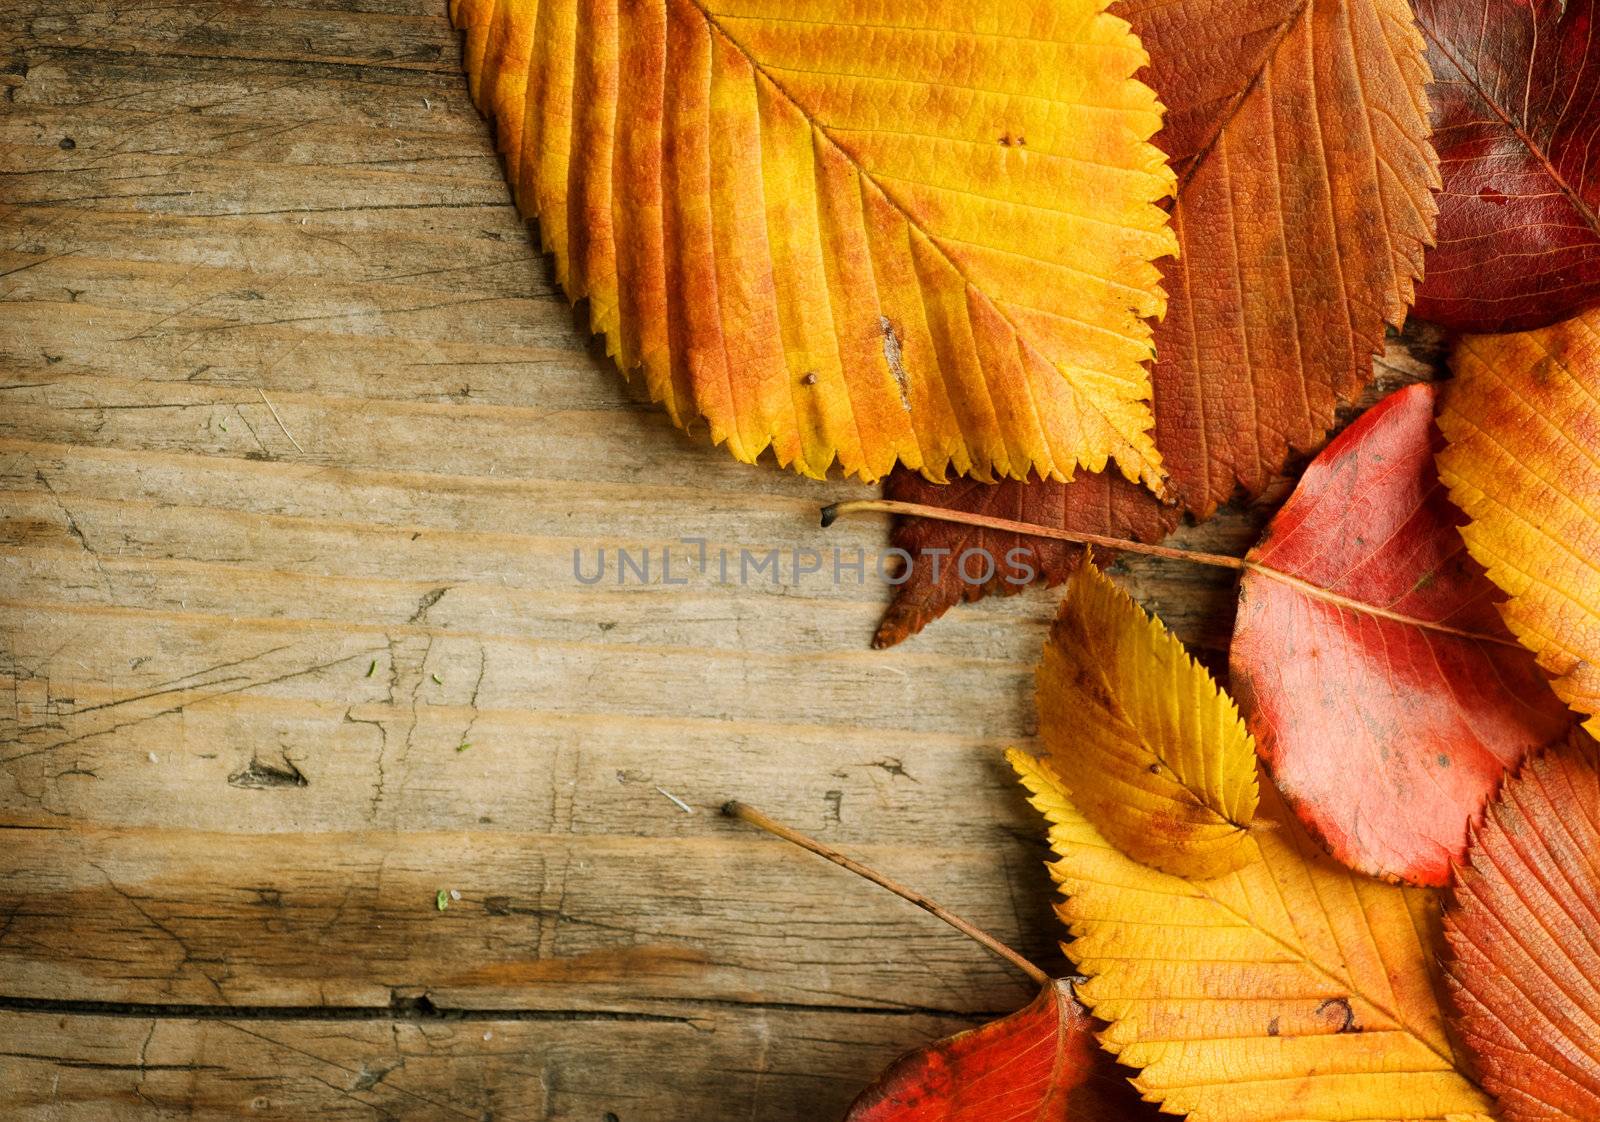 Autumn Leaves over wooden background by SubbotinaA